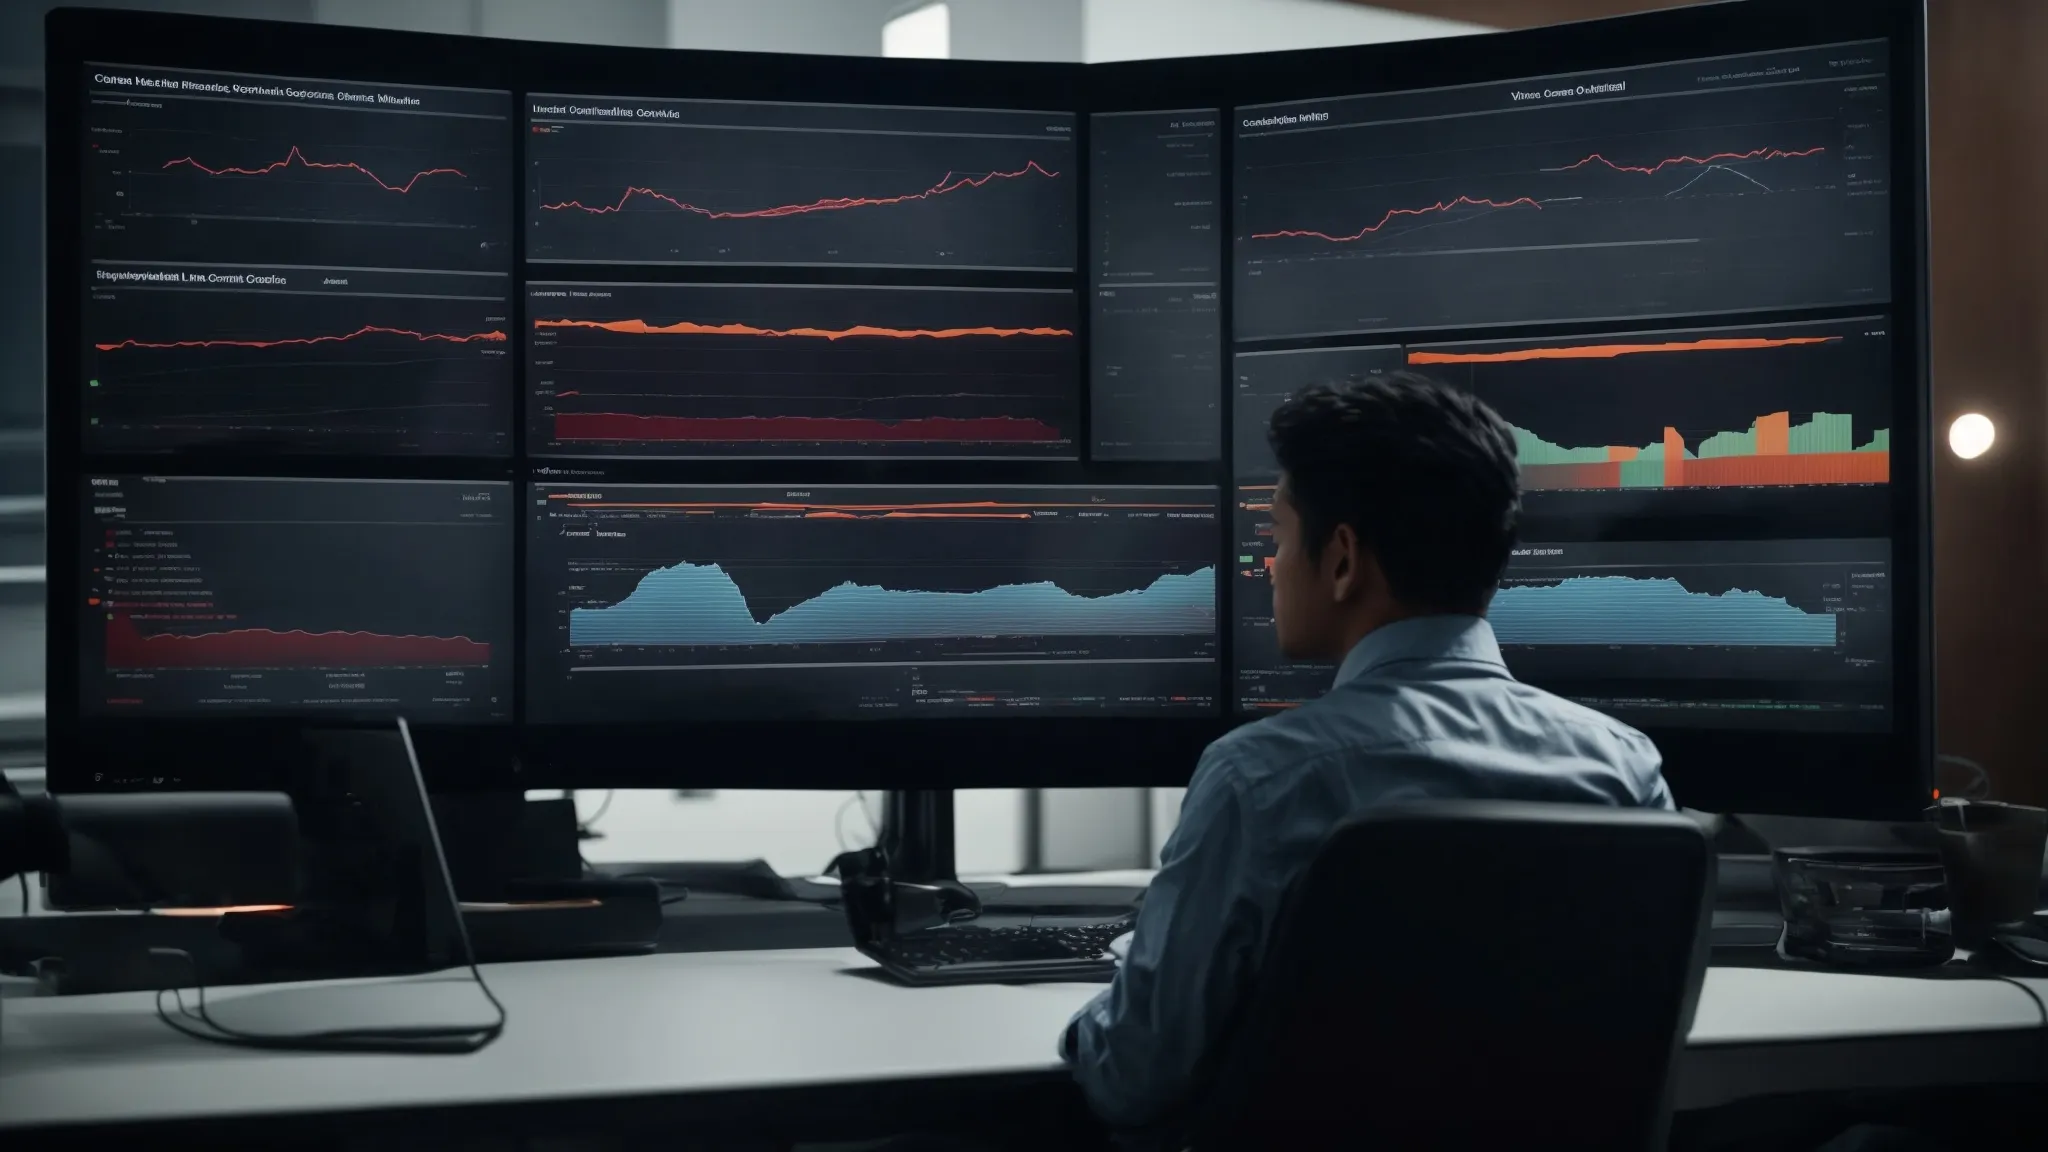 a person sitting before a large monitor displays a complex dashboard with various filtering options for streamlining seo strategy.